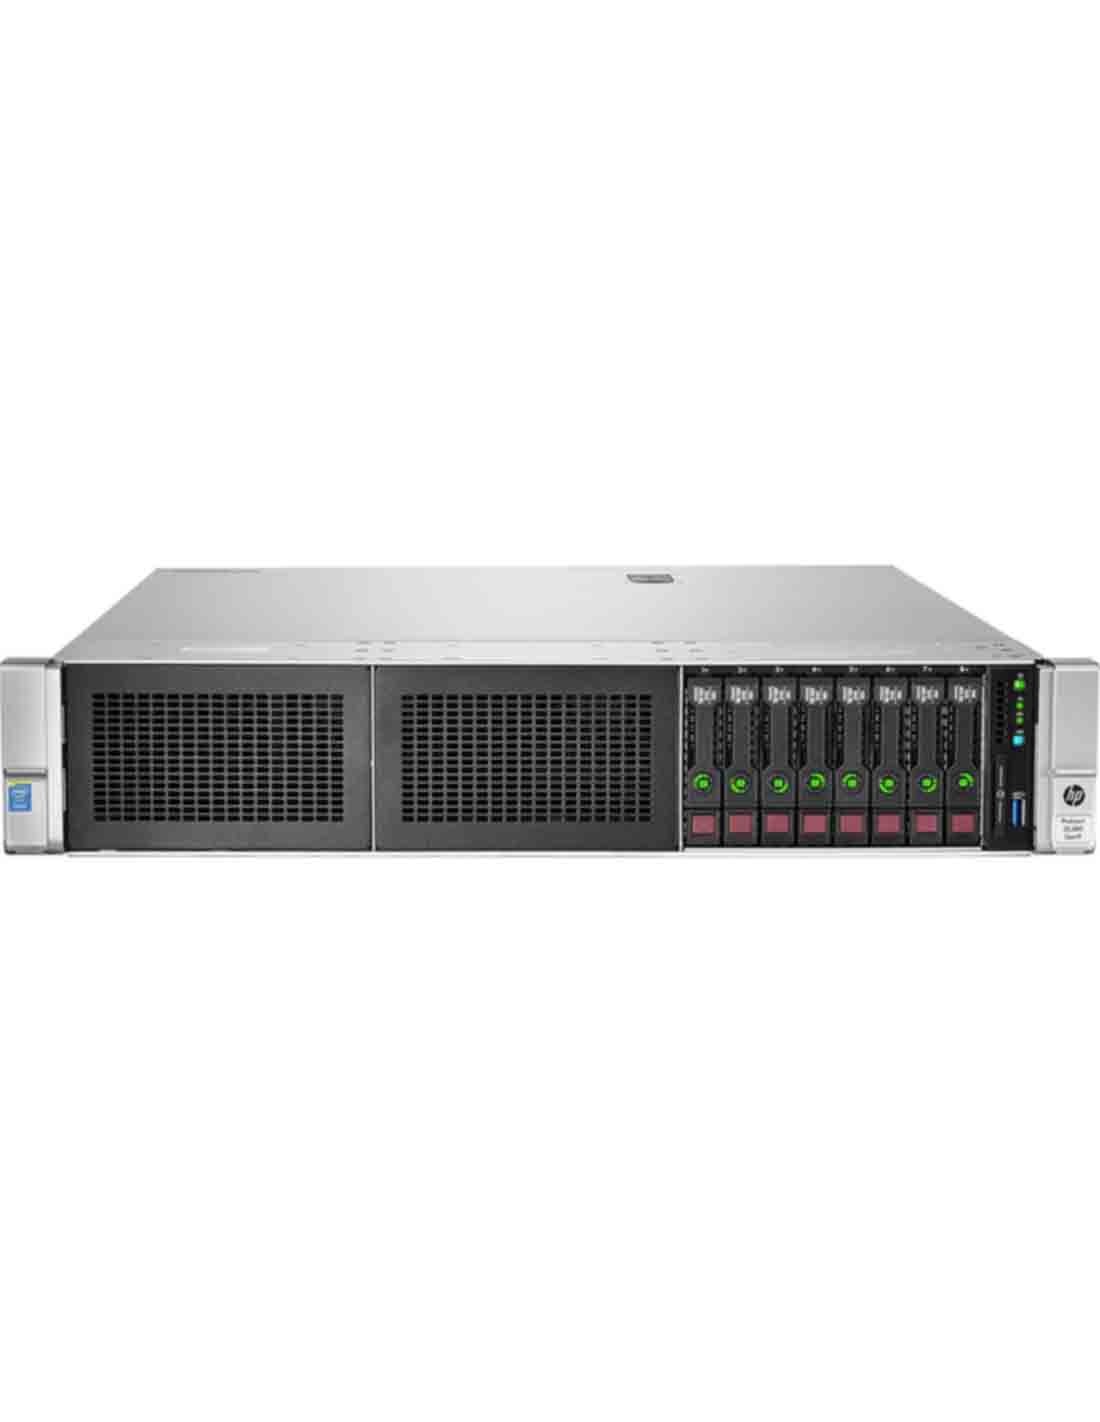 HP ProLiant DL380 Gen9 E5-2650v4 Server at a Cheap Price and Free Delivery in Dubai Online Shop